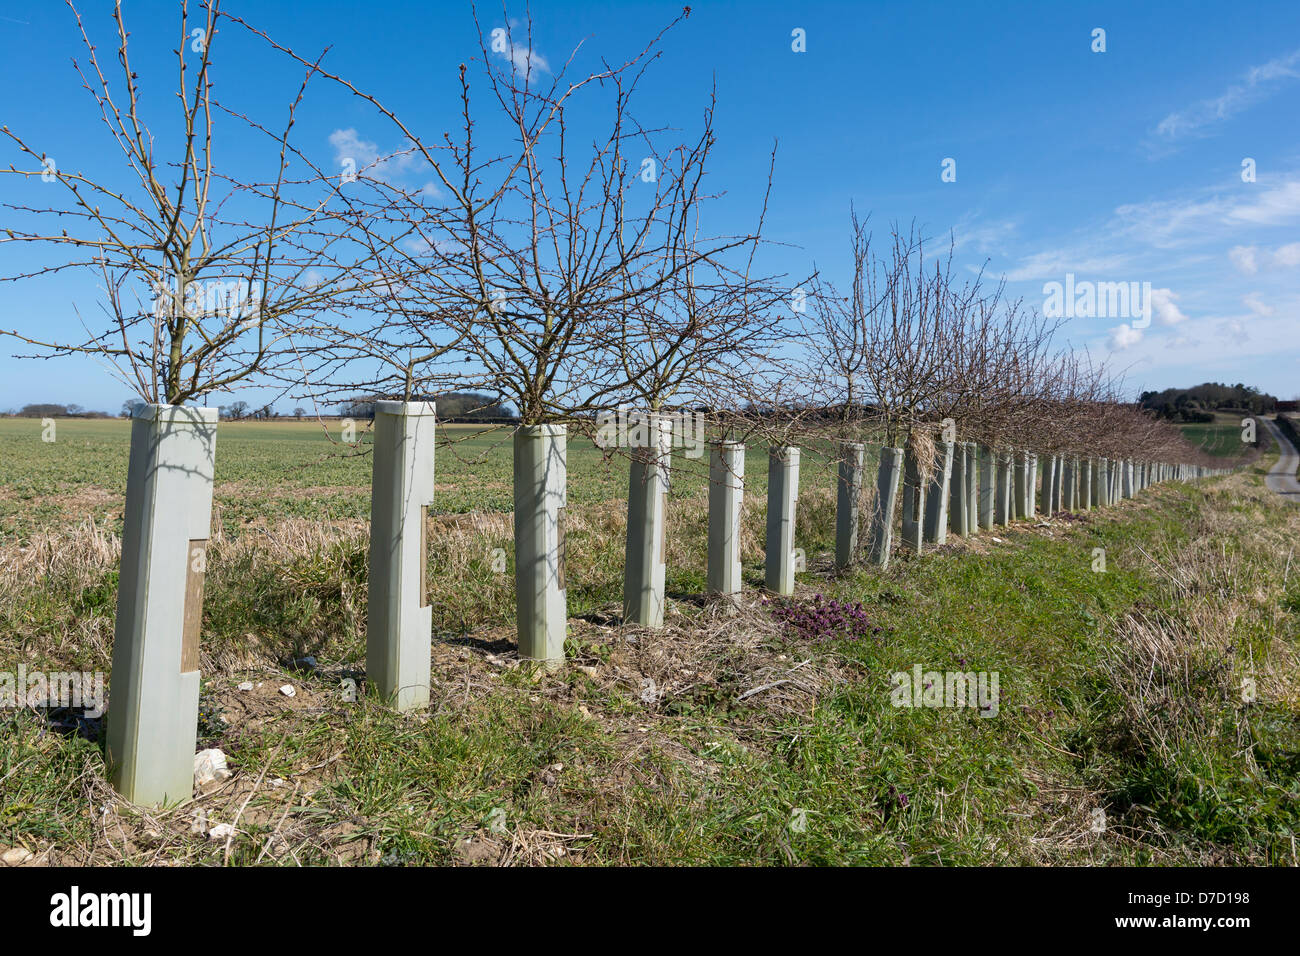 Young Hawthorn Hedging in protective sleeves to stop rabbit grazing, Stock Photo